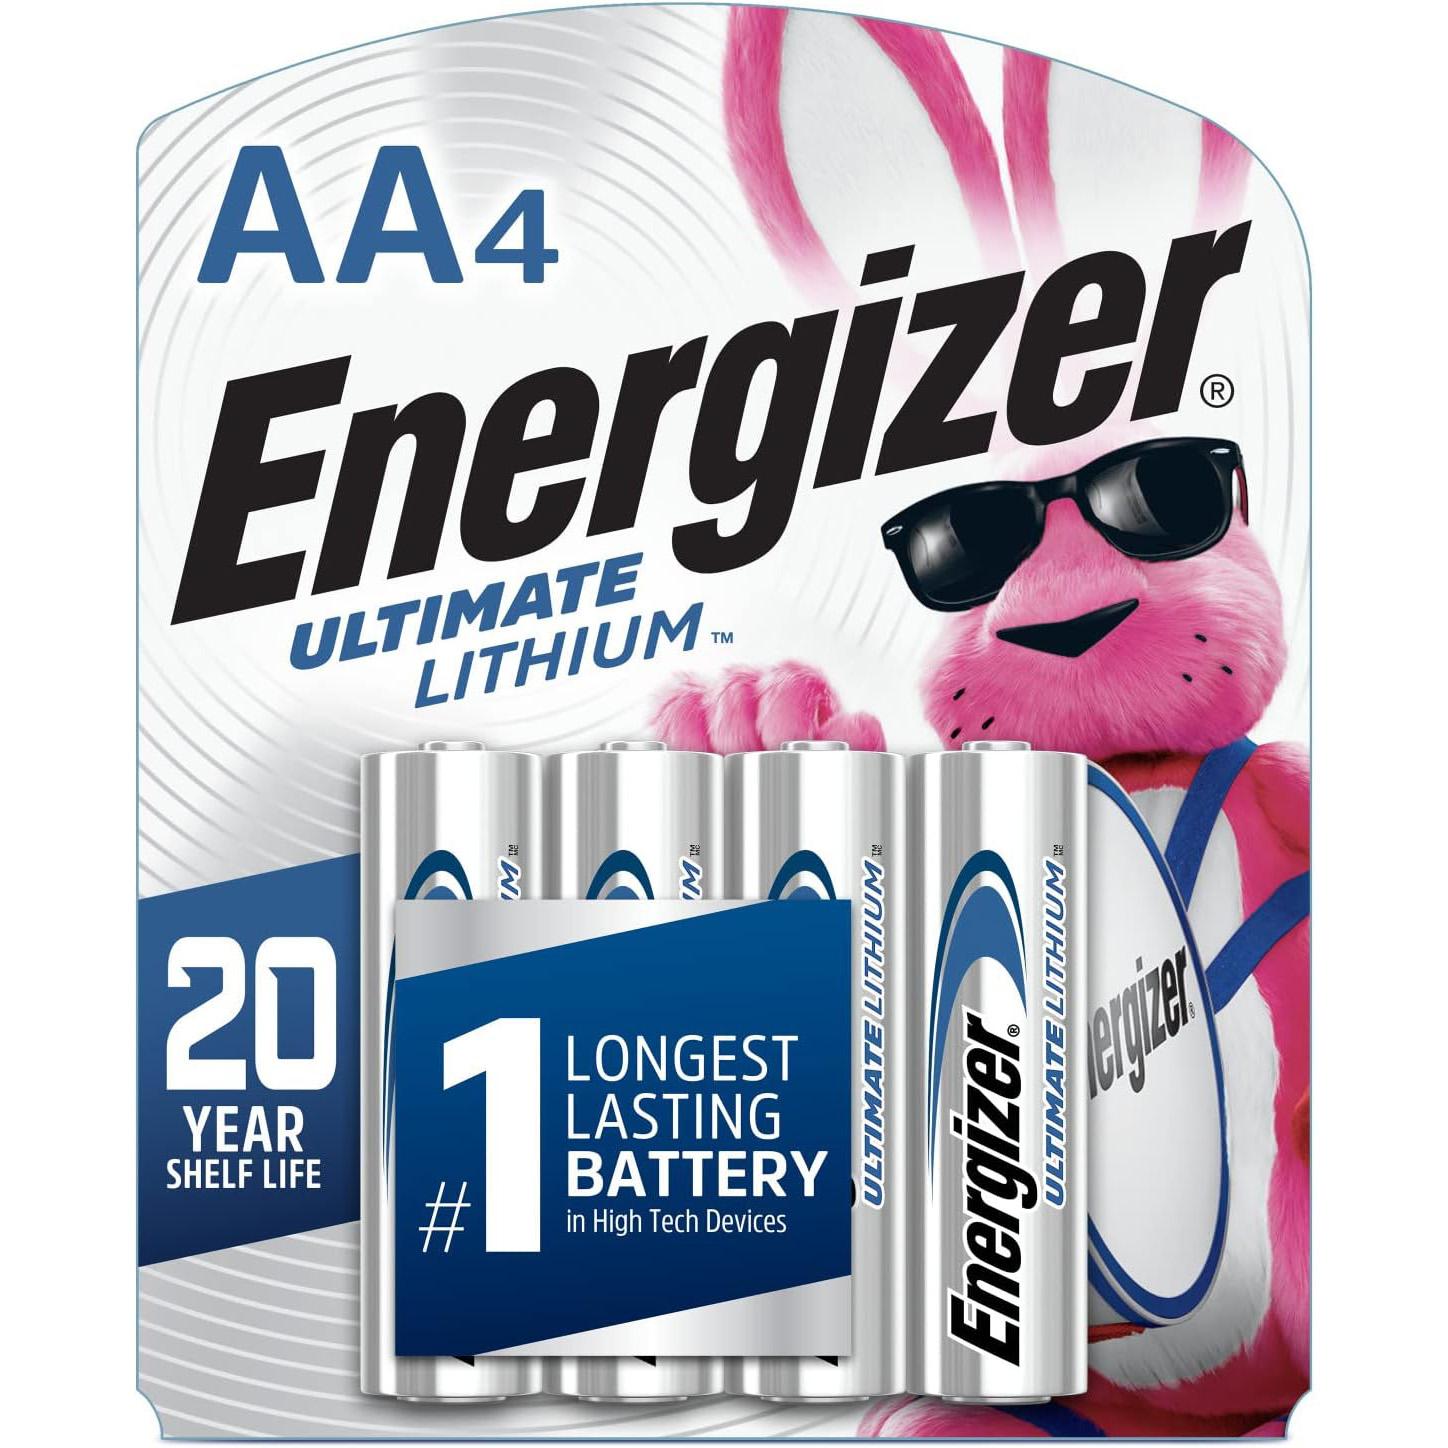 Energizer AA Ultimate Lithium Batteries 4 Pack for $7.12